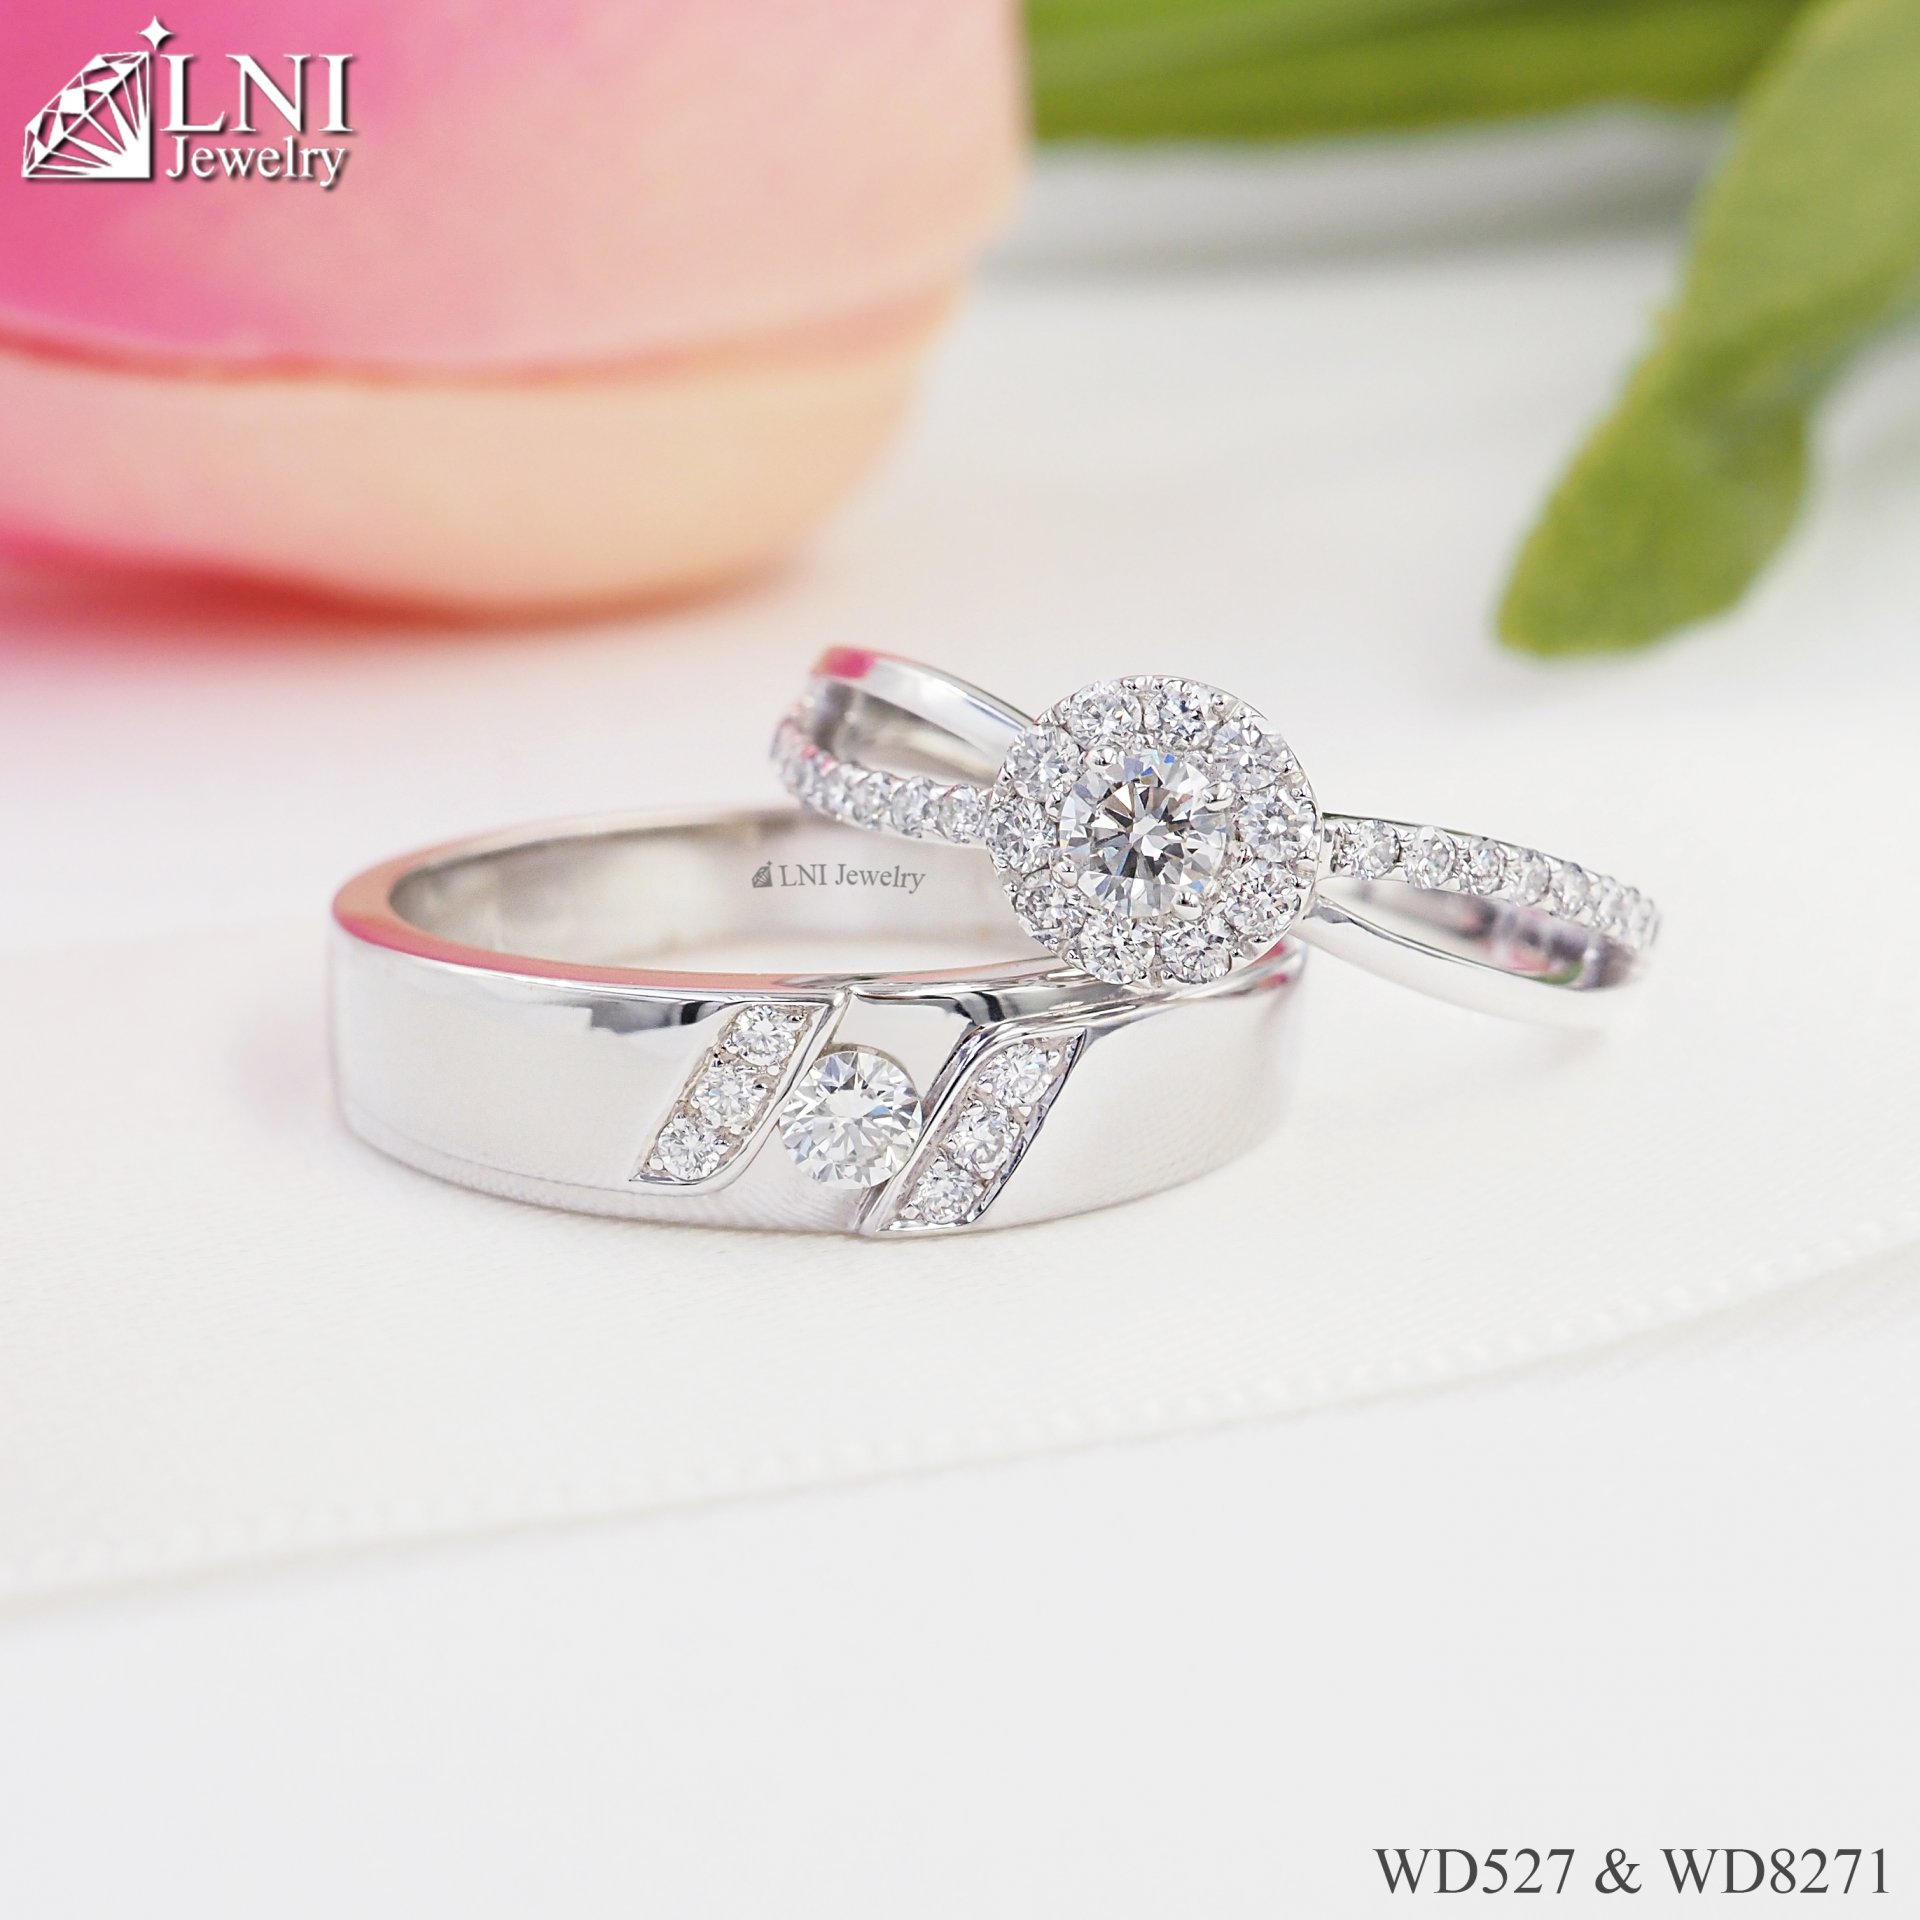 Couple Ring WD527 & WD8271